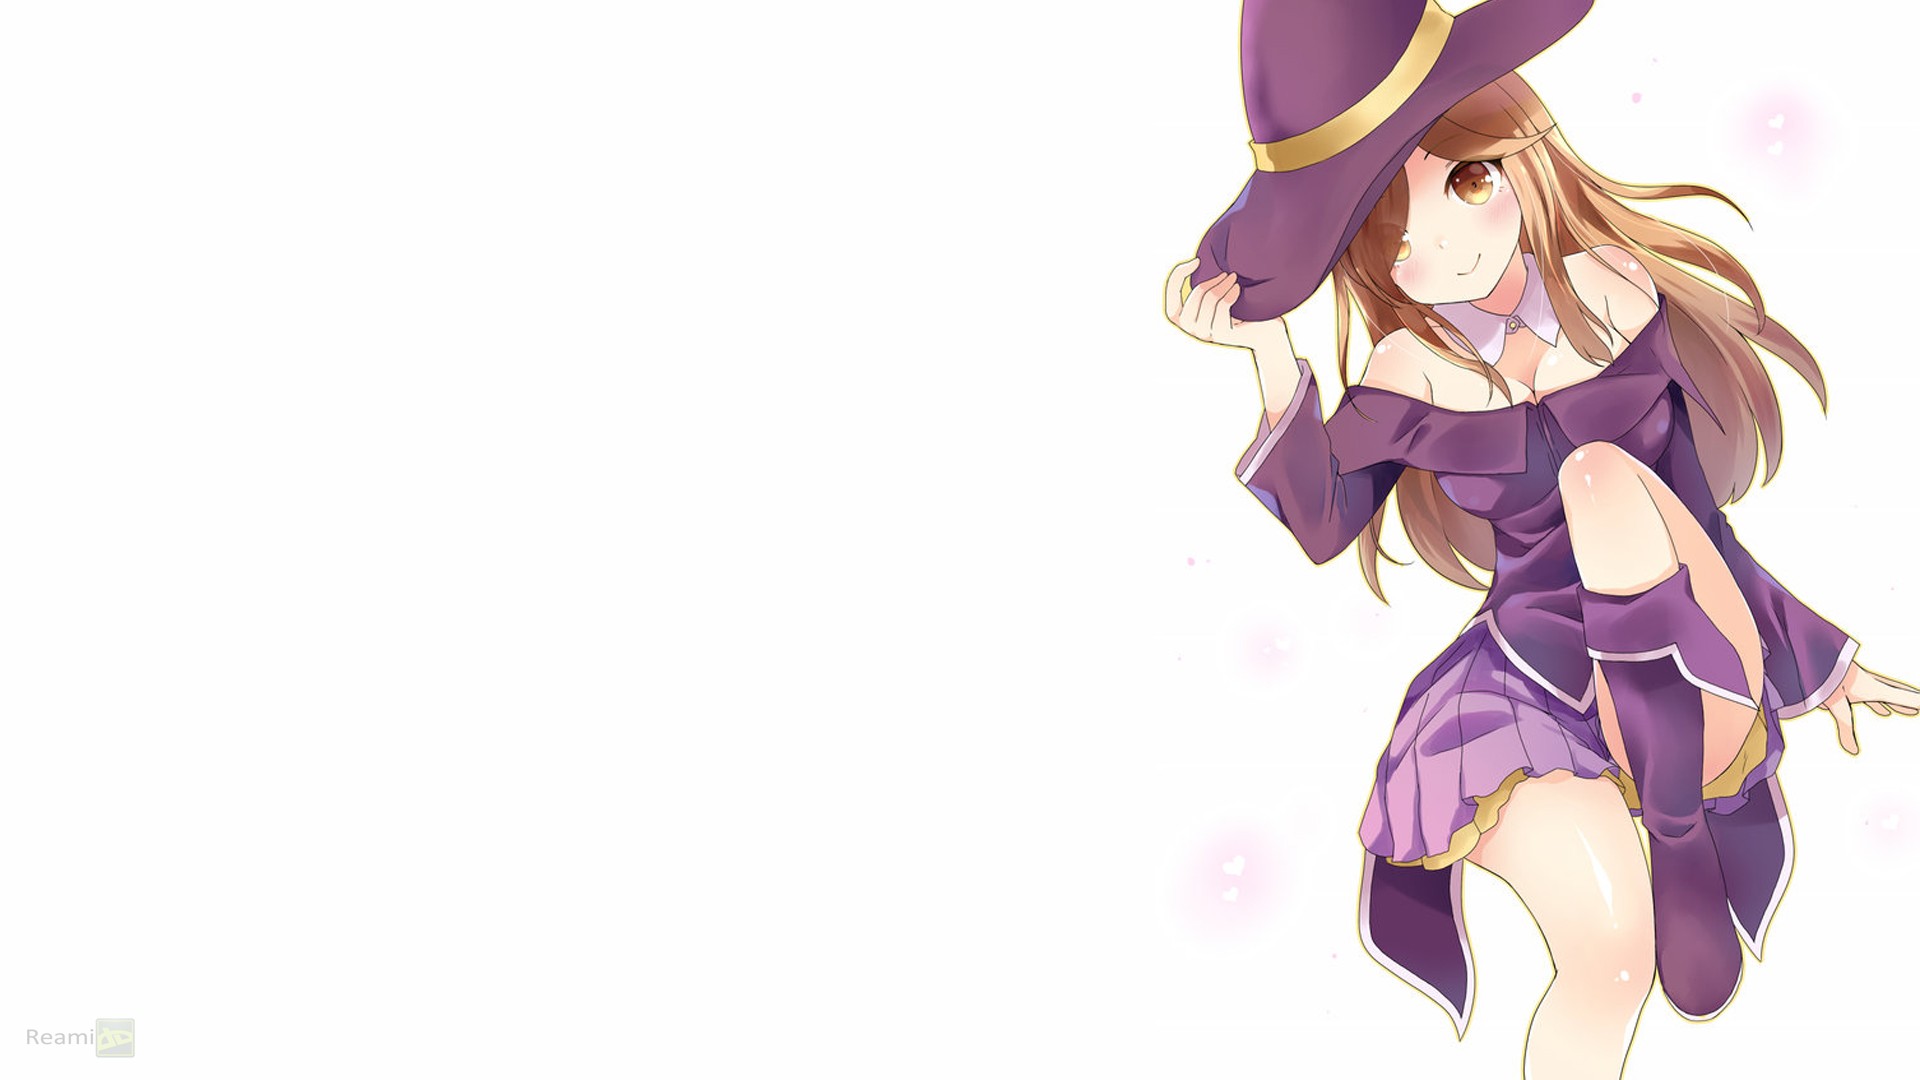 Anime 1920x1080 witch purple blonde DeviantArt hat women with hats white background simple background purple dress brunette long hair smiling anime anime girls